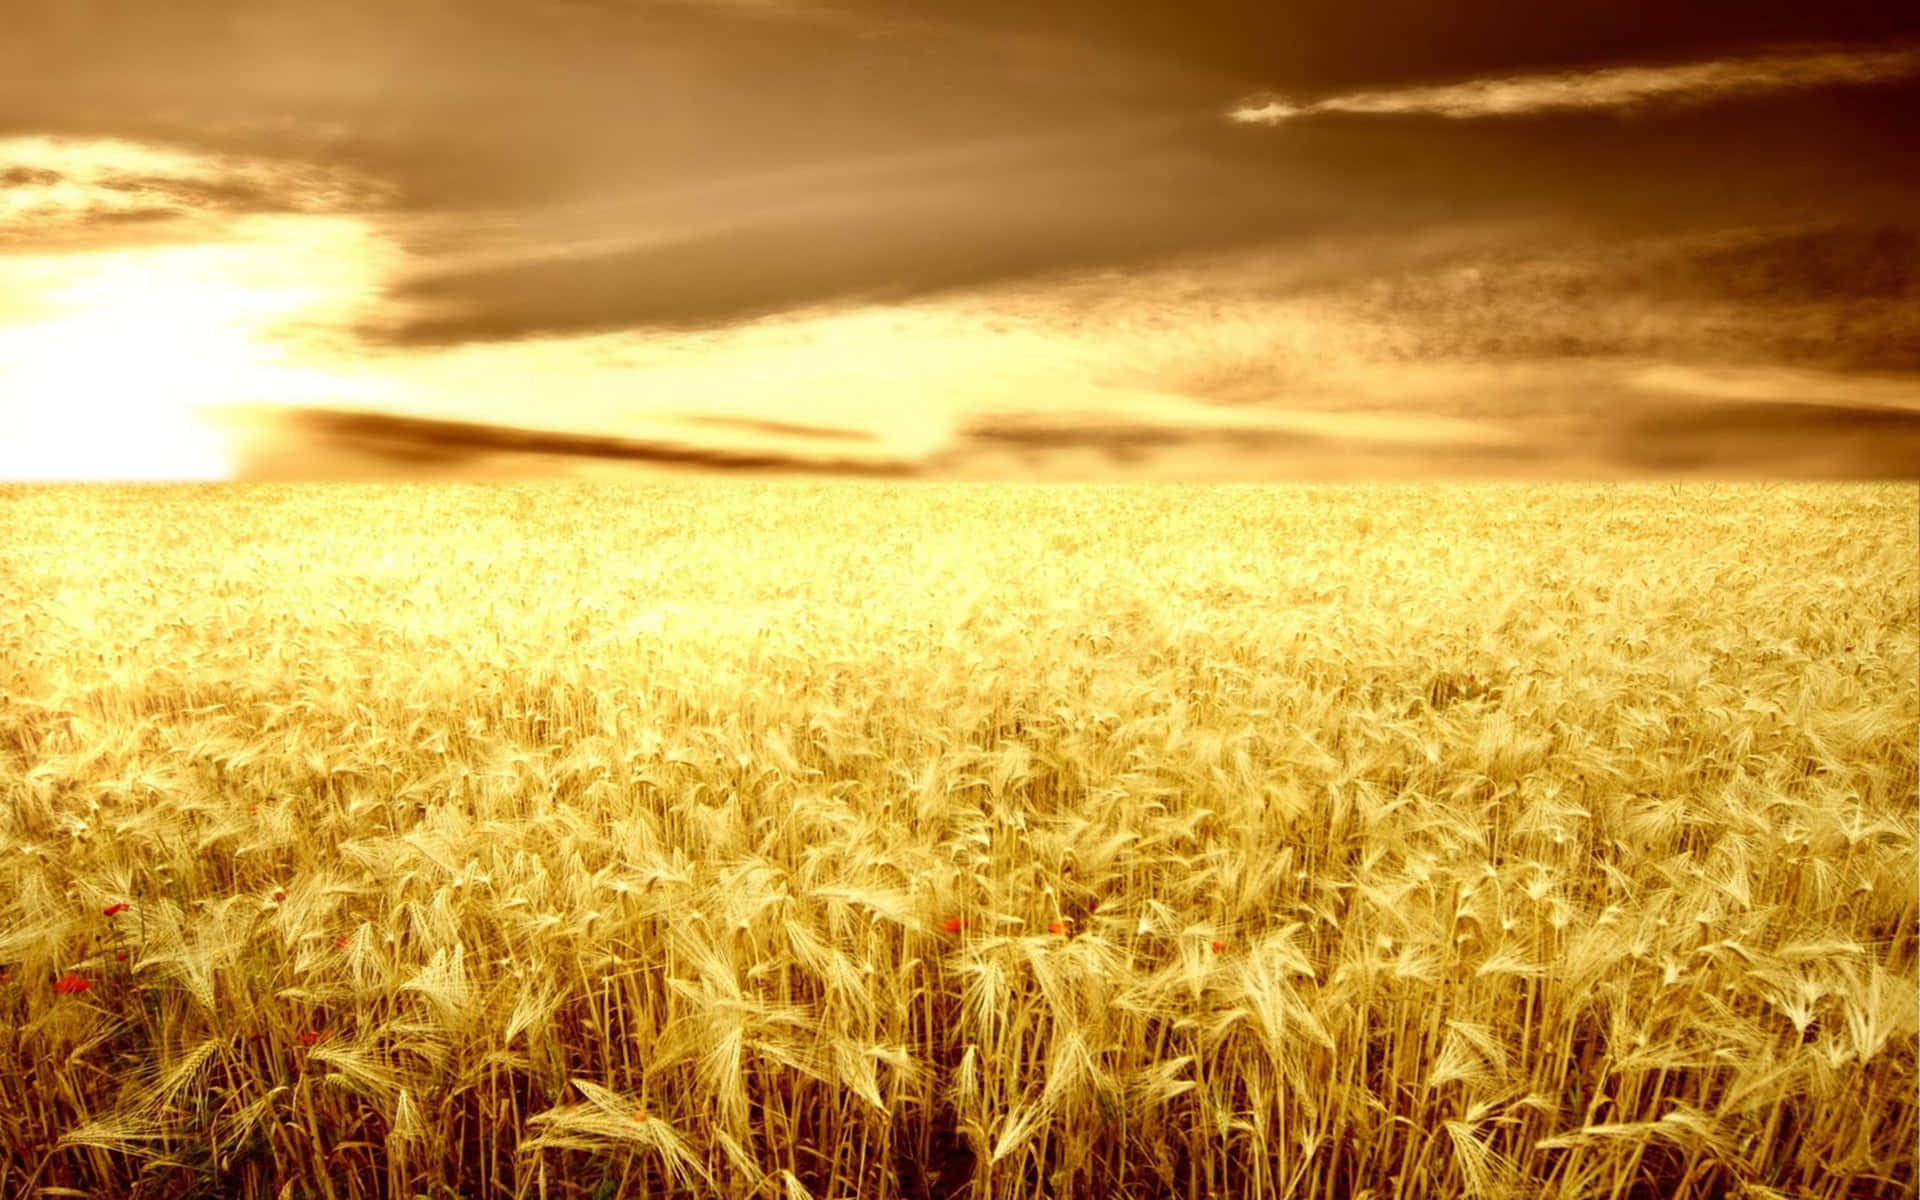 A Golden Wheat Field With A Sunset Behind It